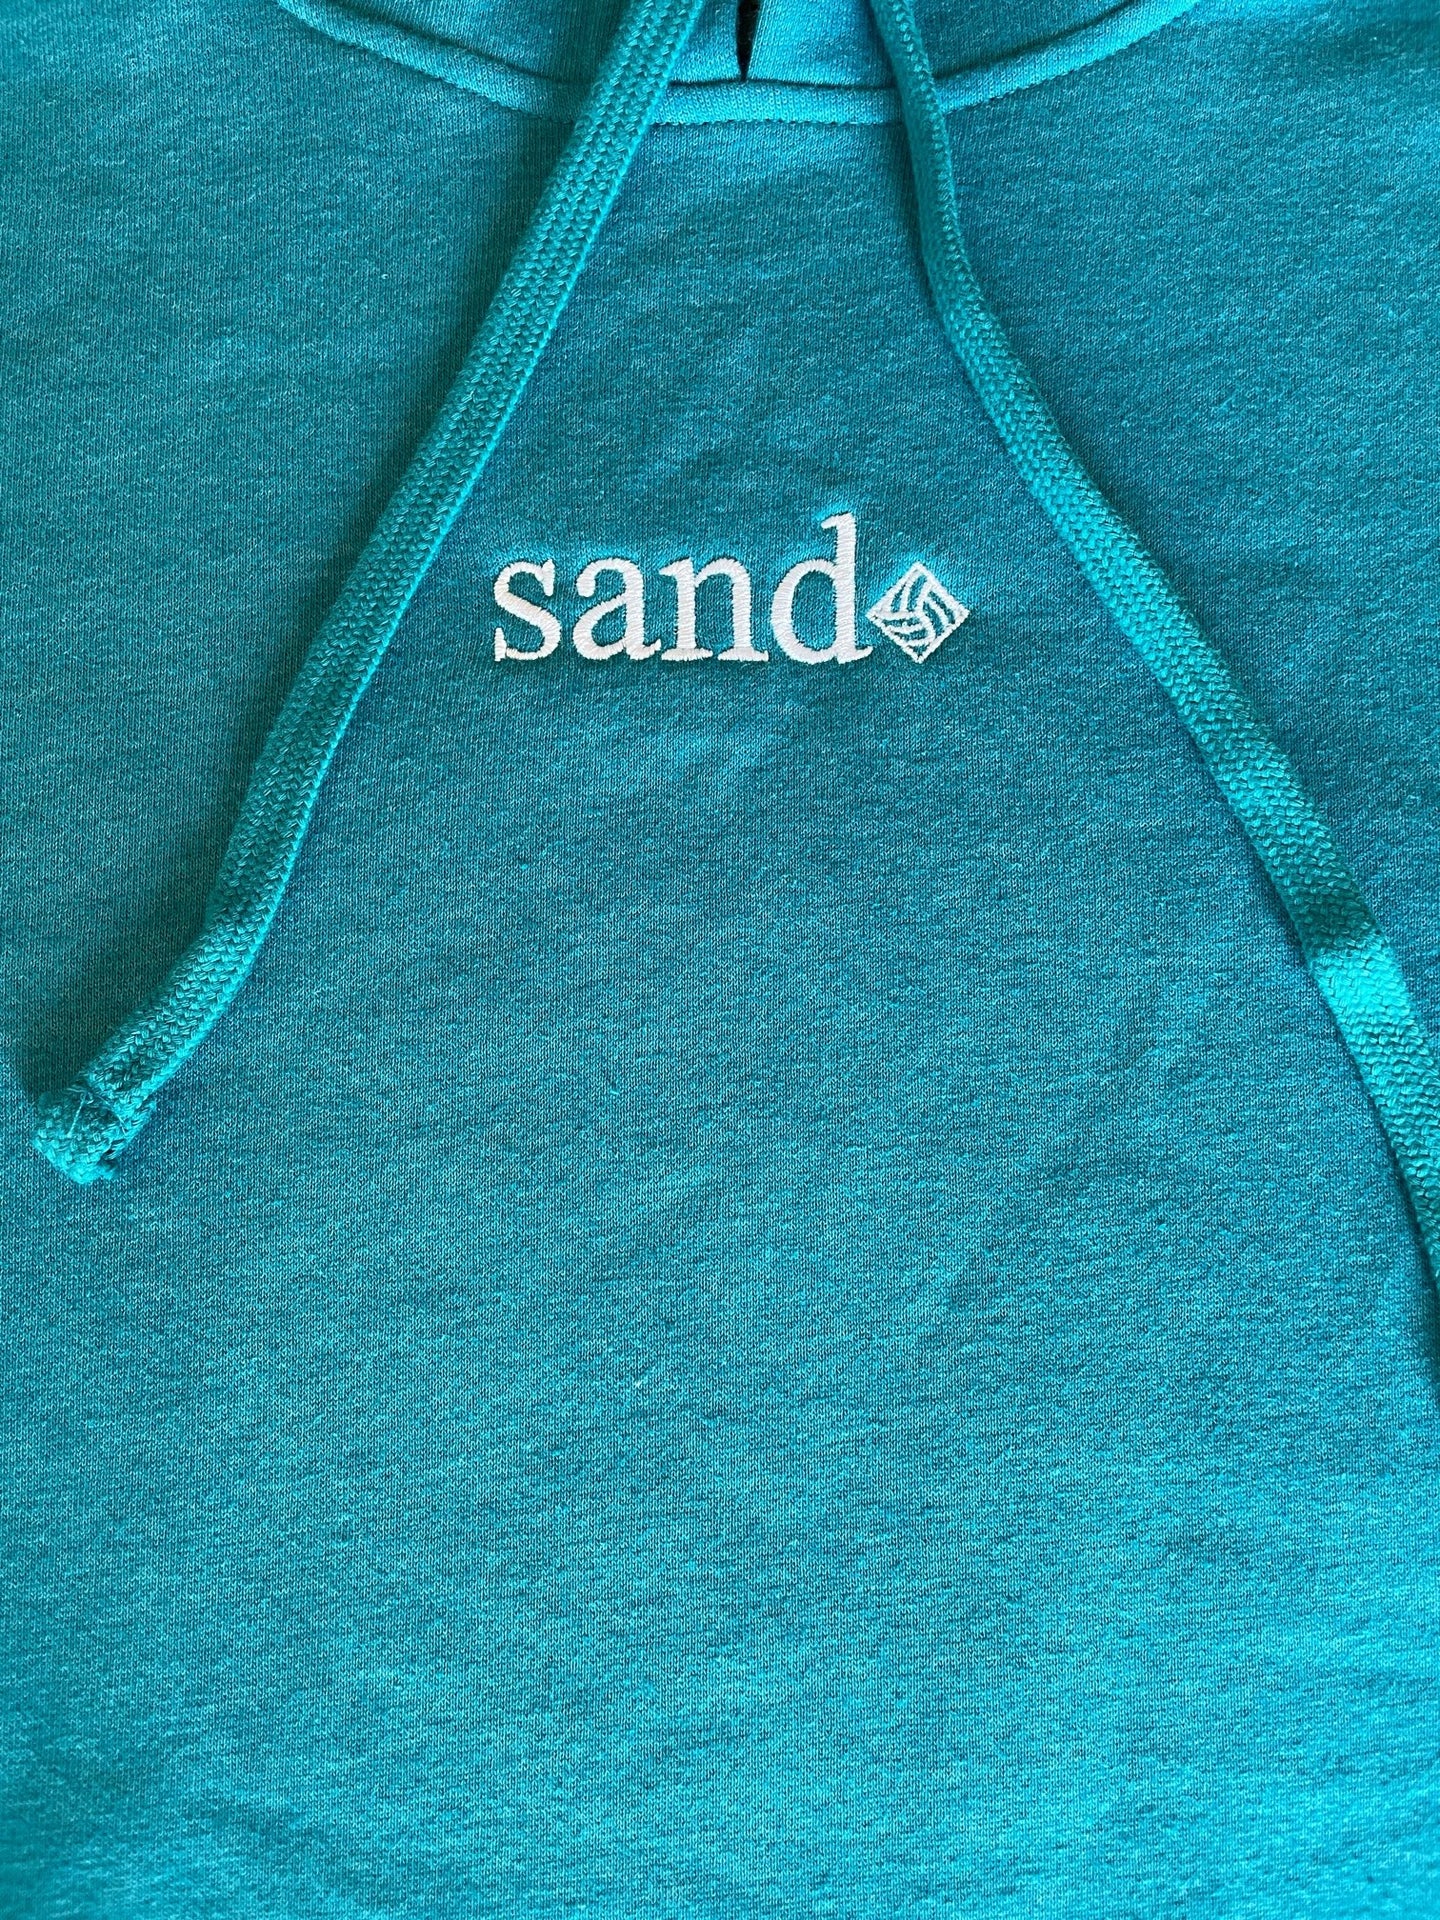 Embroidered Sand Hoodie